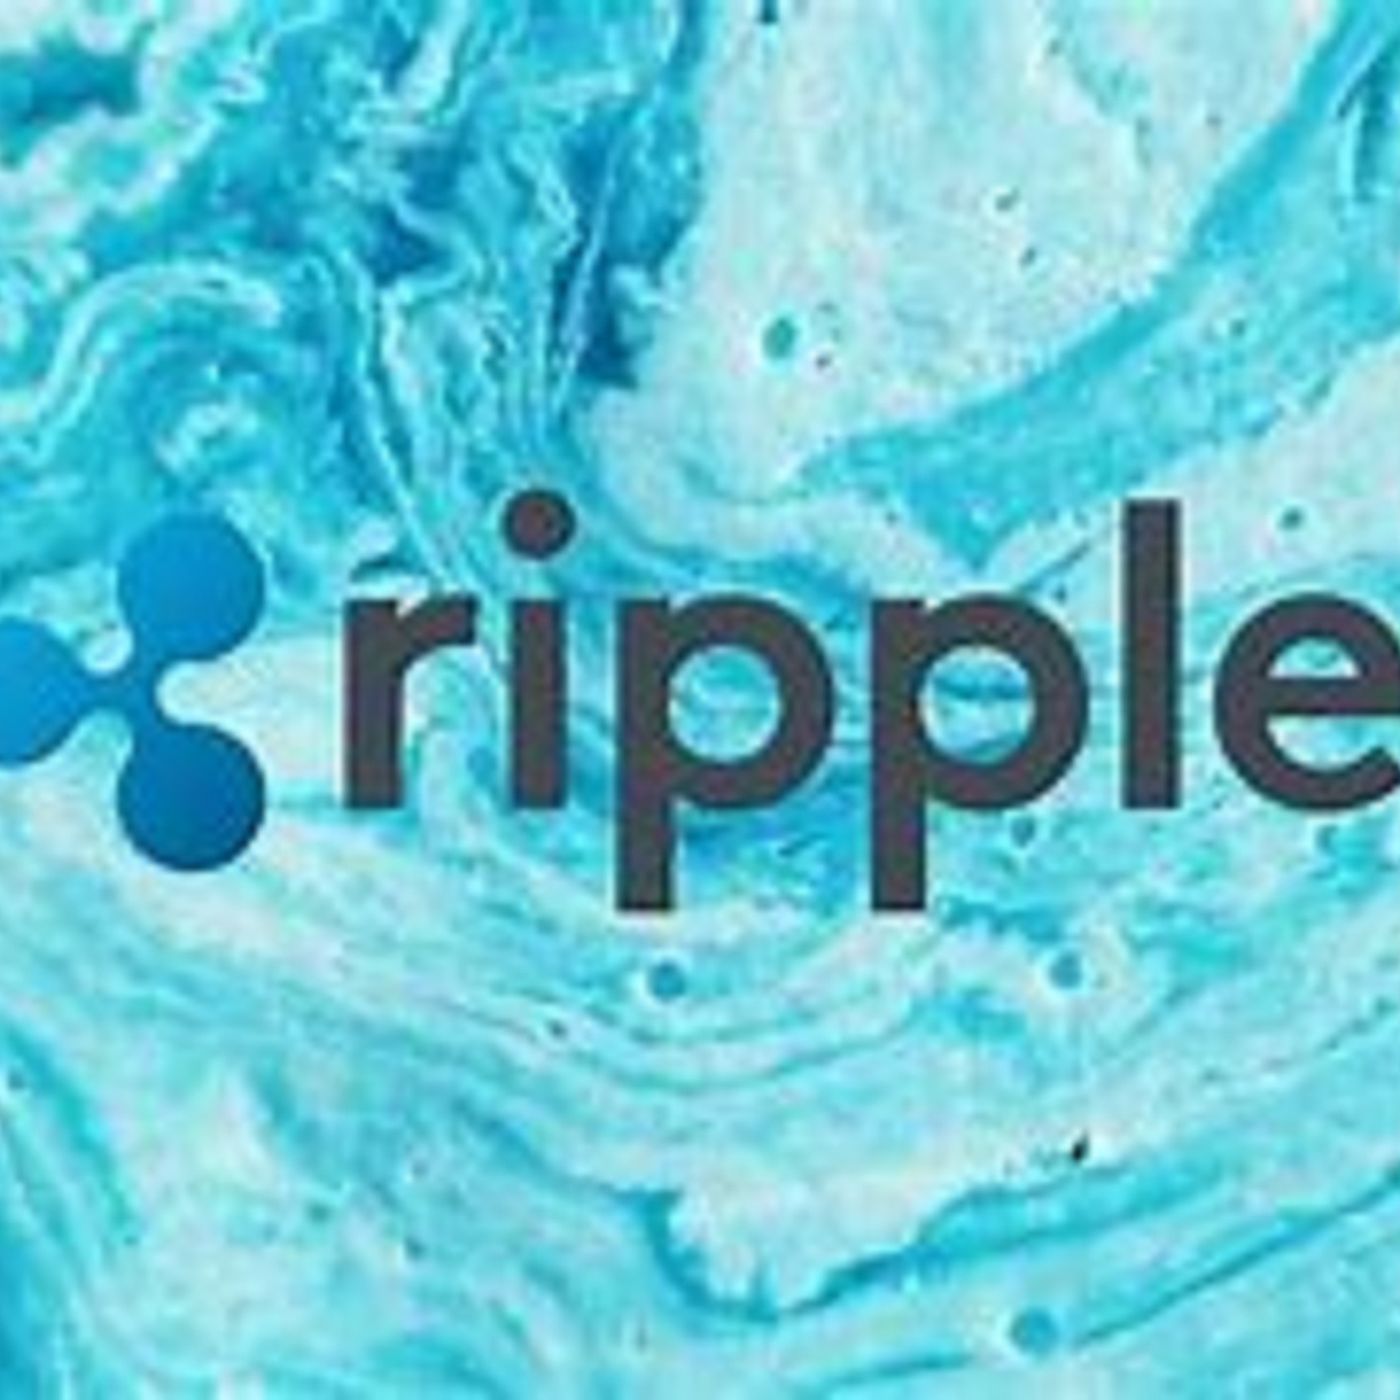 Ripple Price Recovery Could Soon Fade, These Are Key Levels To Watch